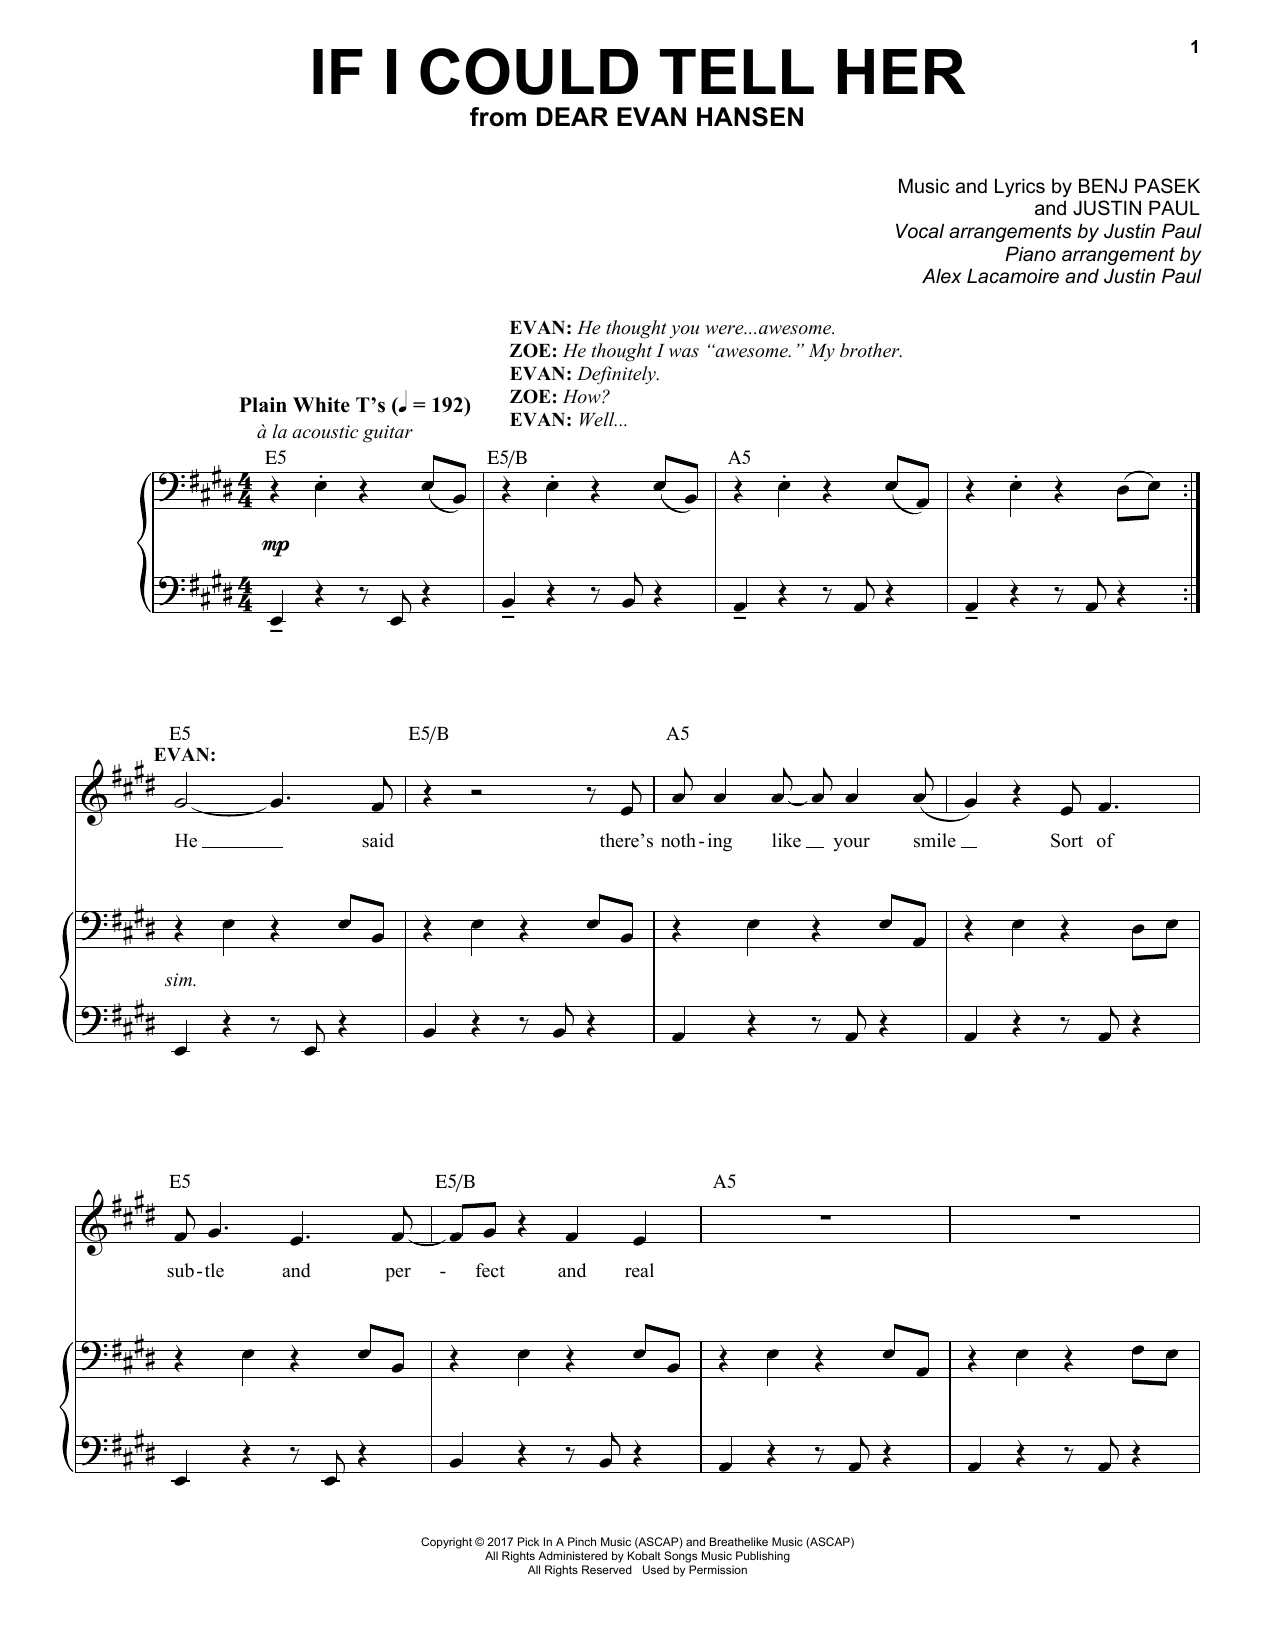 Download Pasek & Paul If I Could Tell Her (from Dear Evan Han Sheet Music